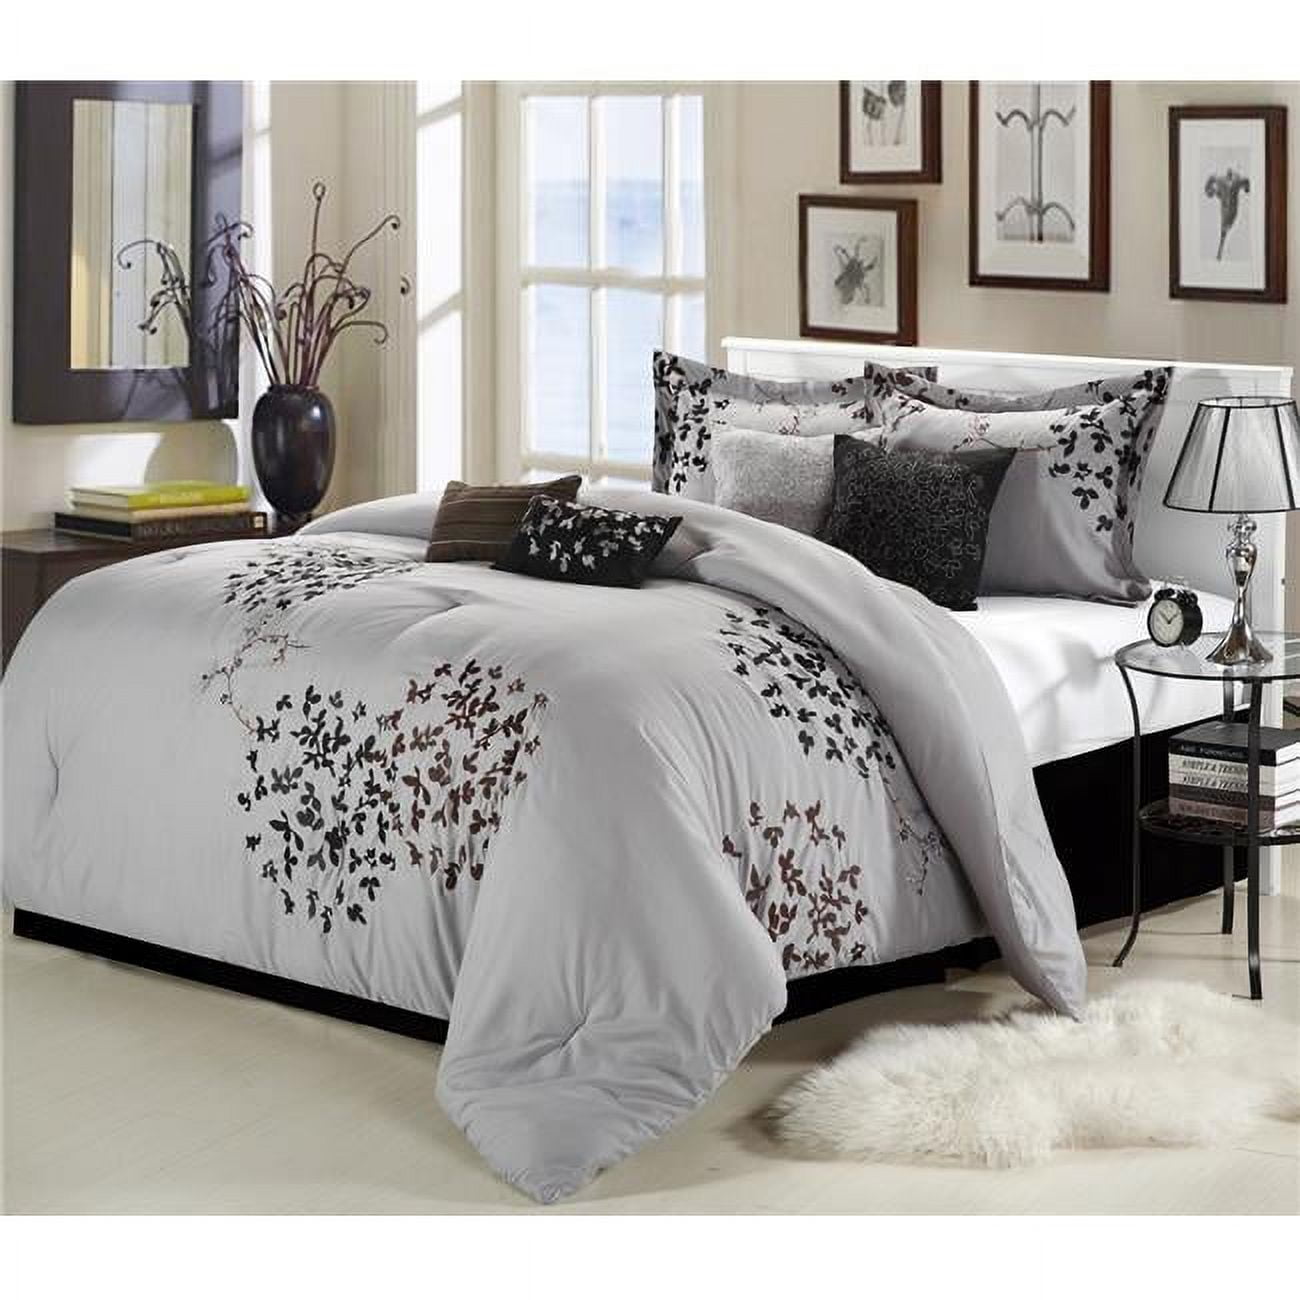 25-84-q-06-us Cheila 12 Piece Bed In A Bag Embroidered Comforter Set With 4 Piece Sheet Set, Silver - Queen